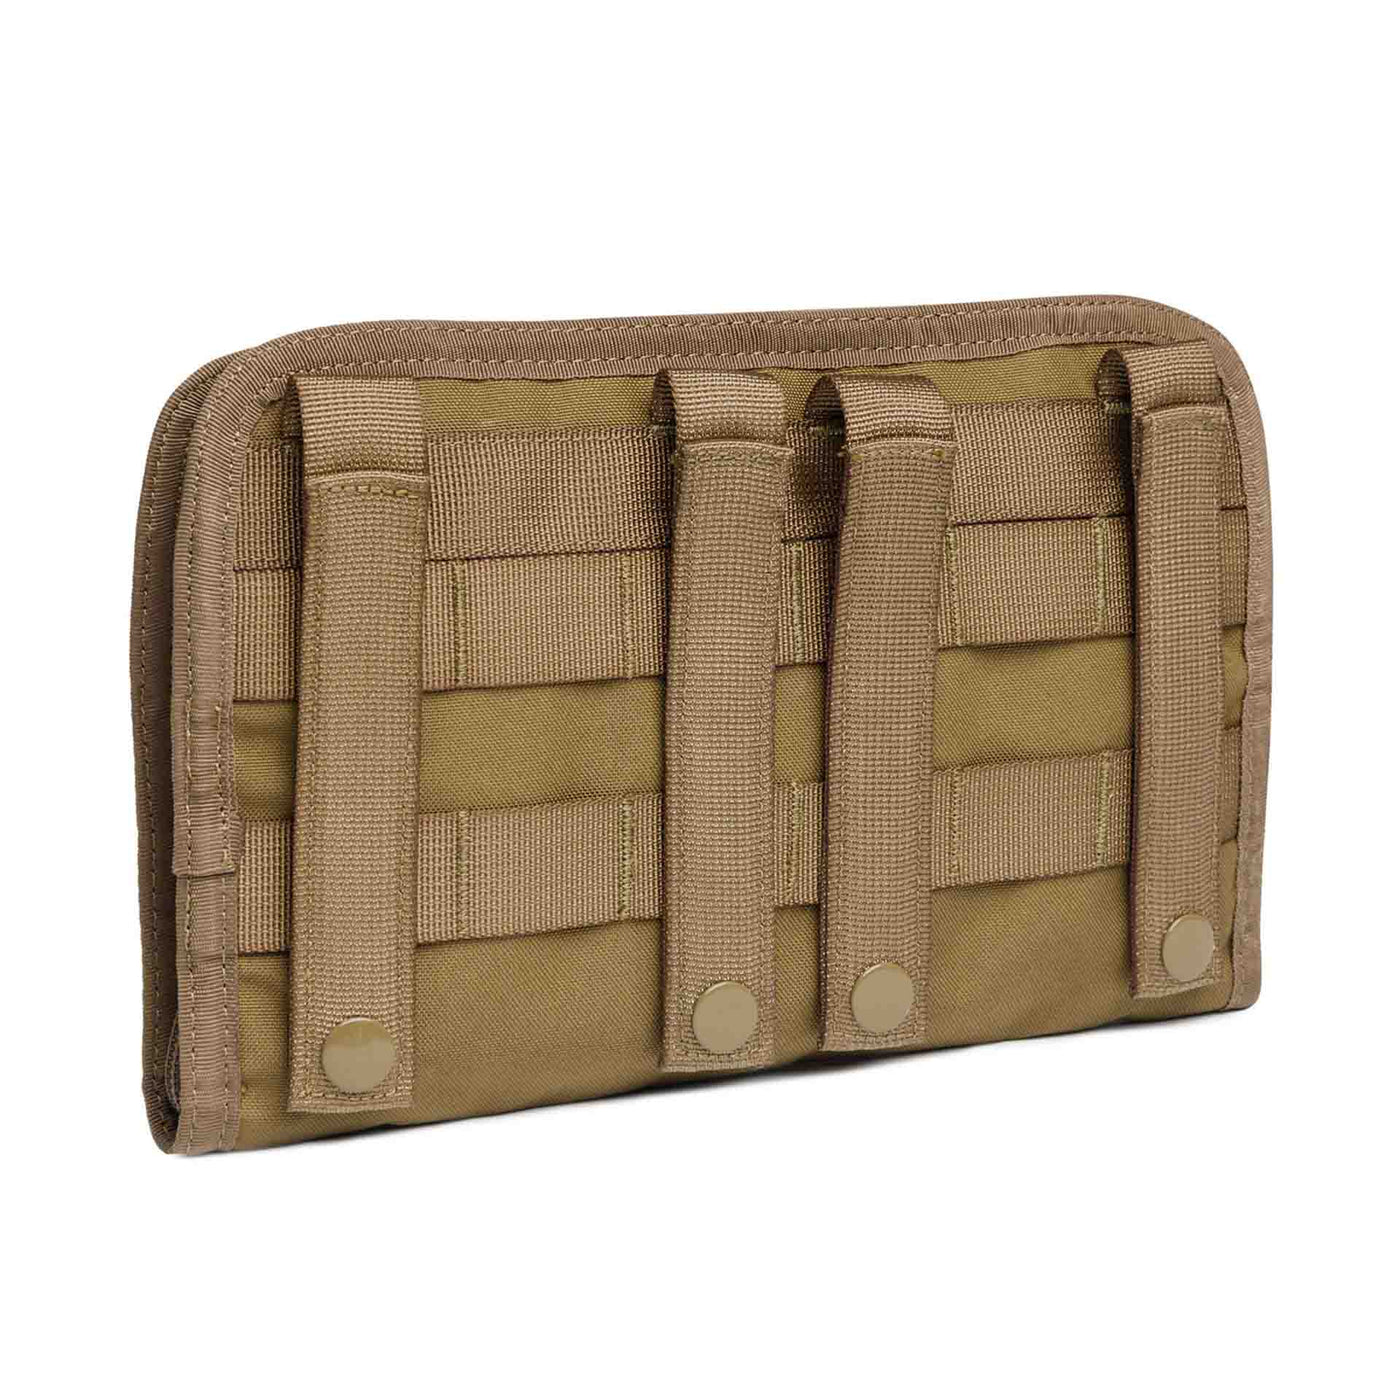 Tactical Organizer Pouch with MOLLE system coyete rear